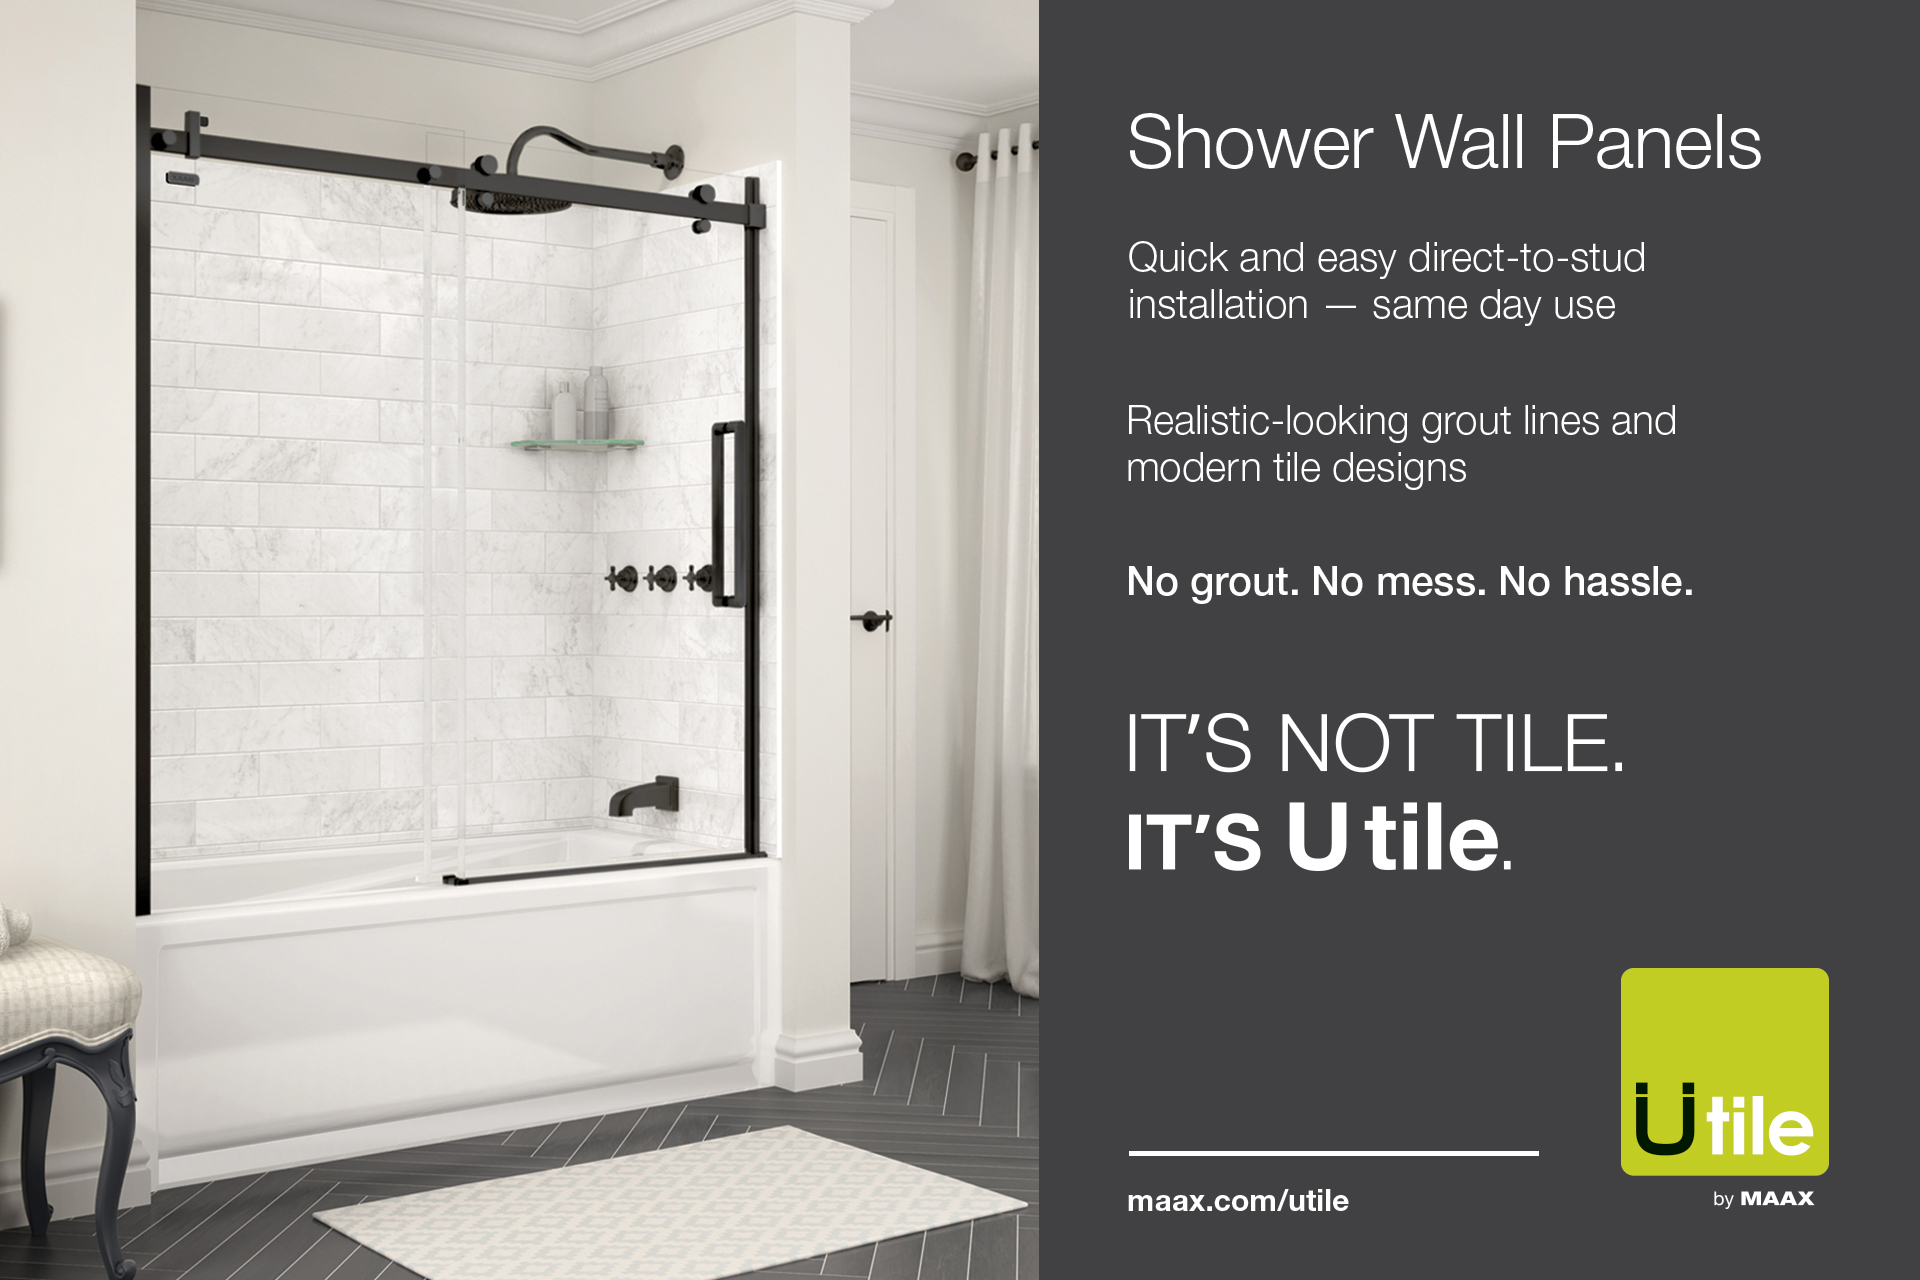 Utile Named Innovation Partner Of The, How To Install Utile Shower Walls